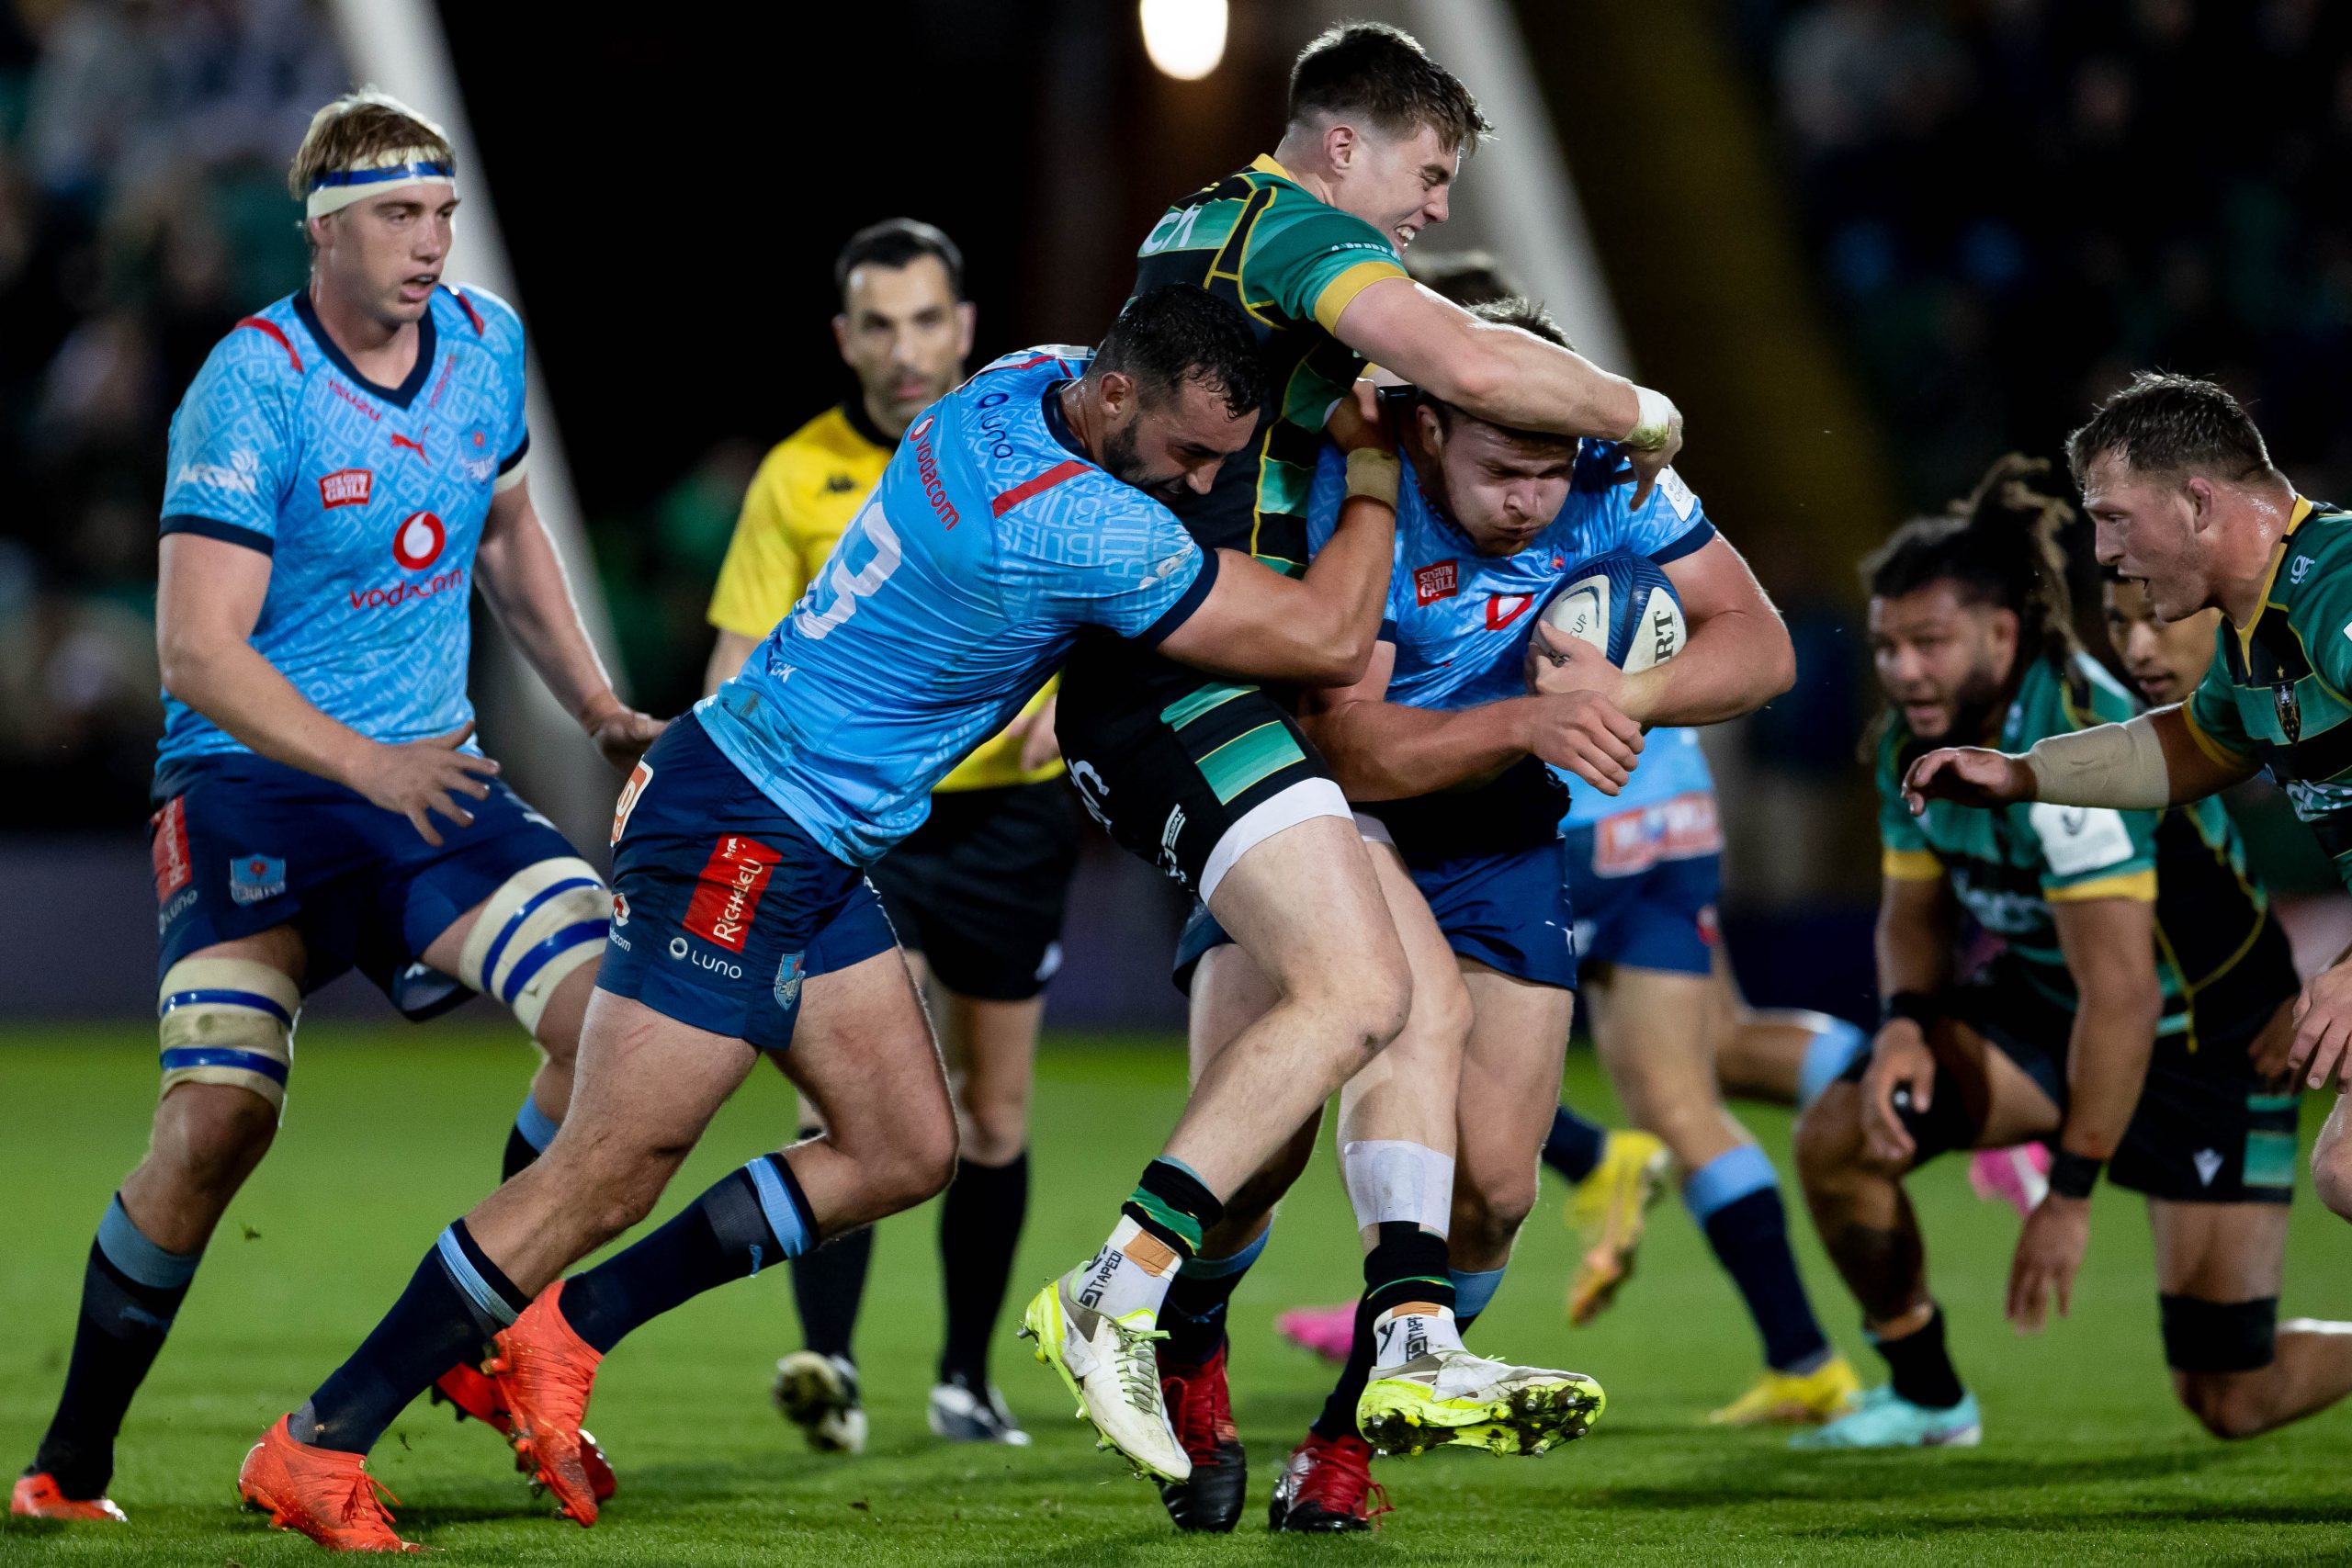 Saints end Vodacom Bulls journey in Investec Champions Cup